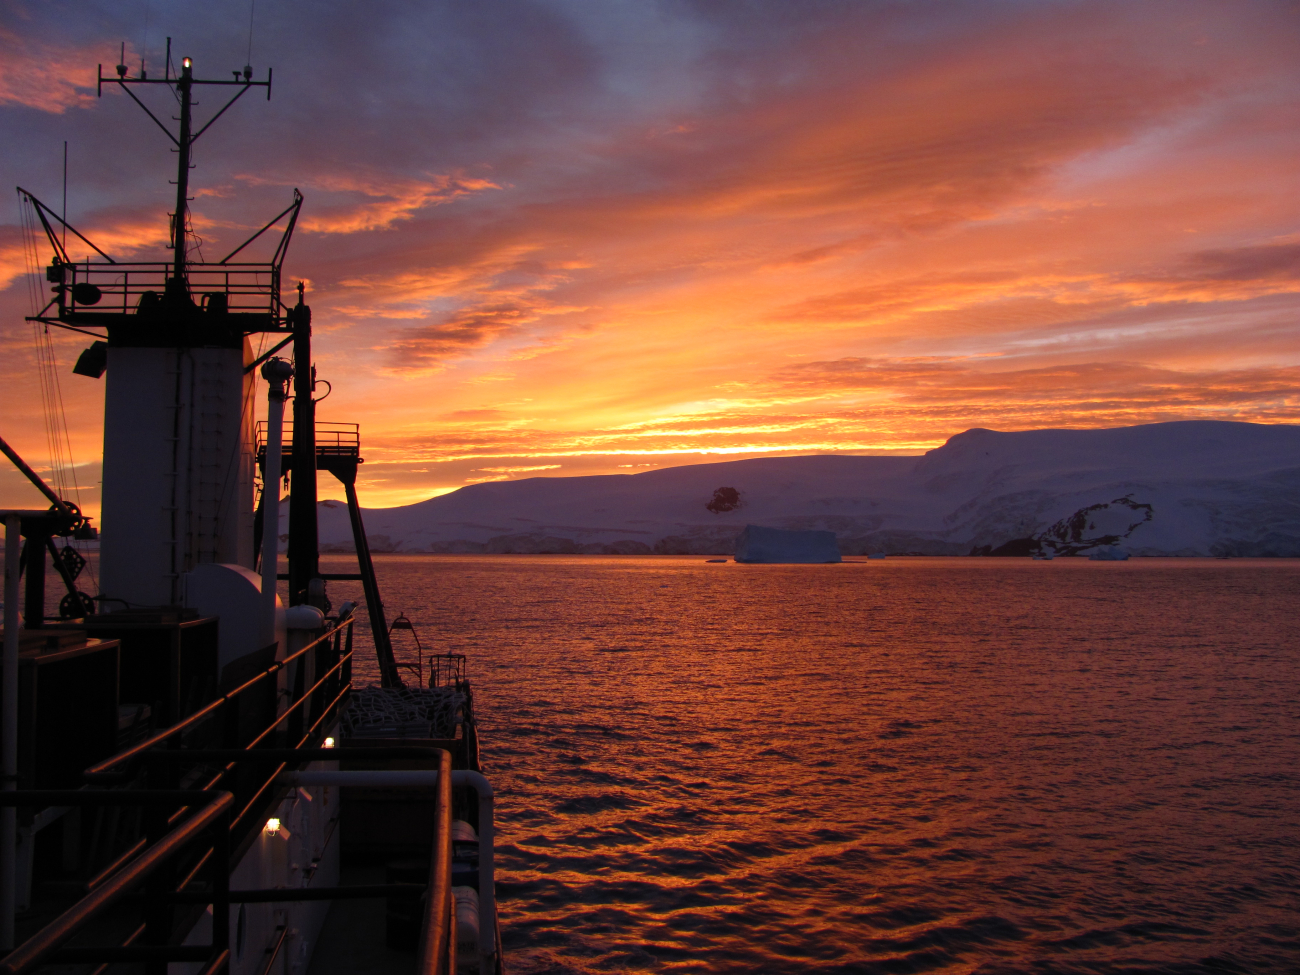 The sun rises over the R/V Moana Wave in Discovery Bay, Antarctica